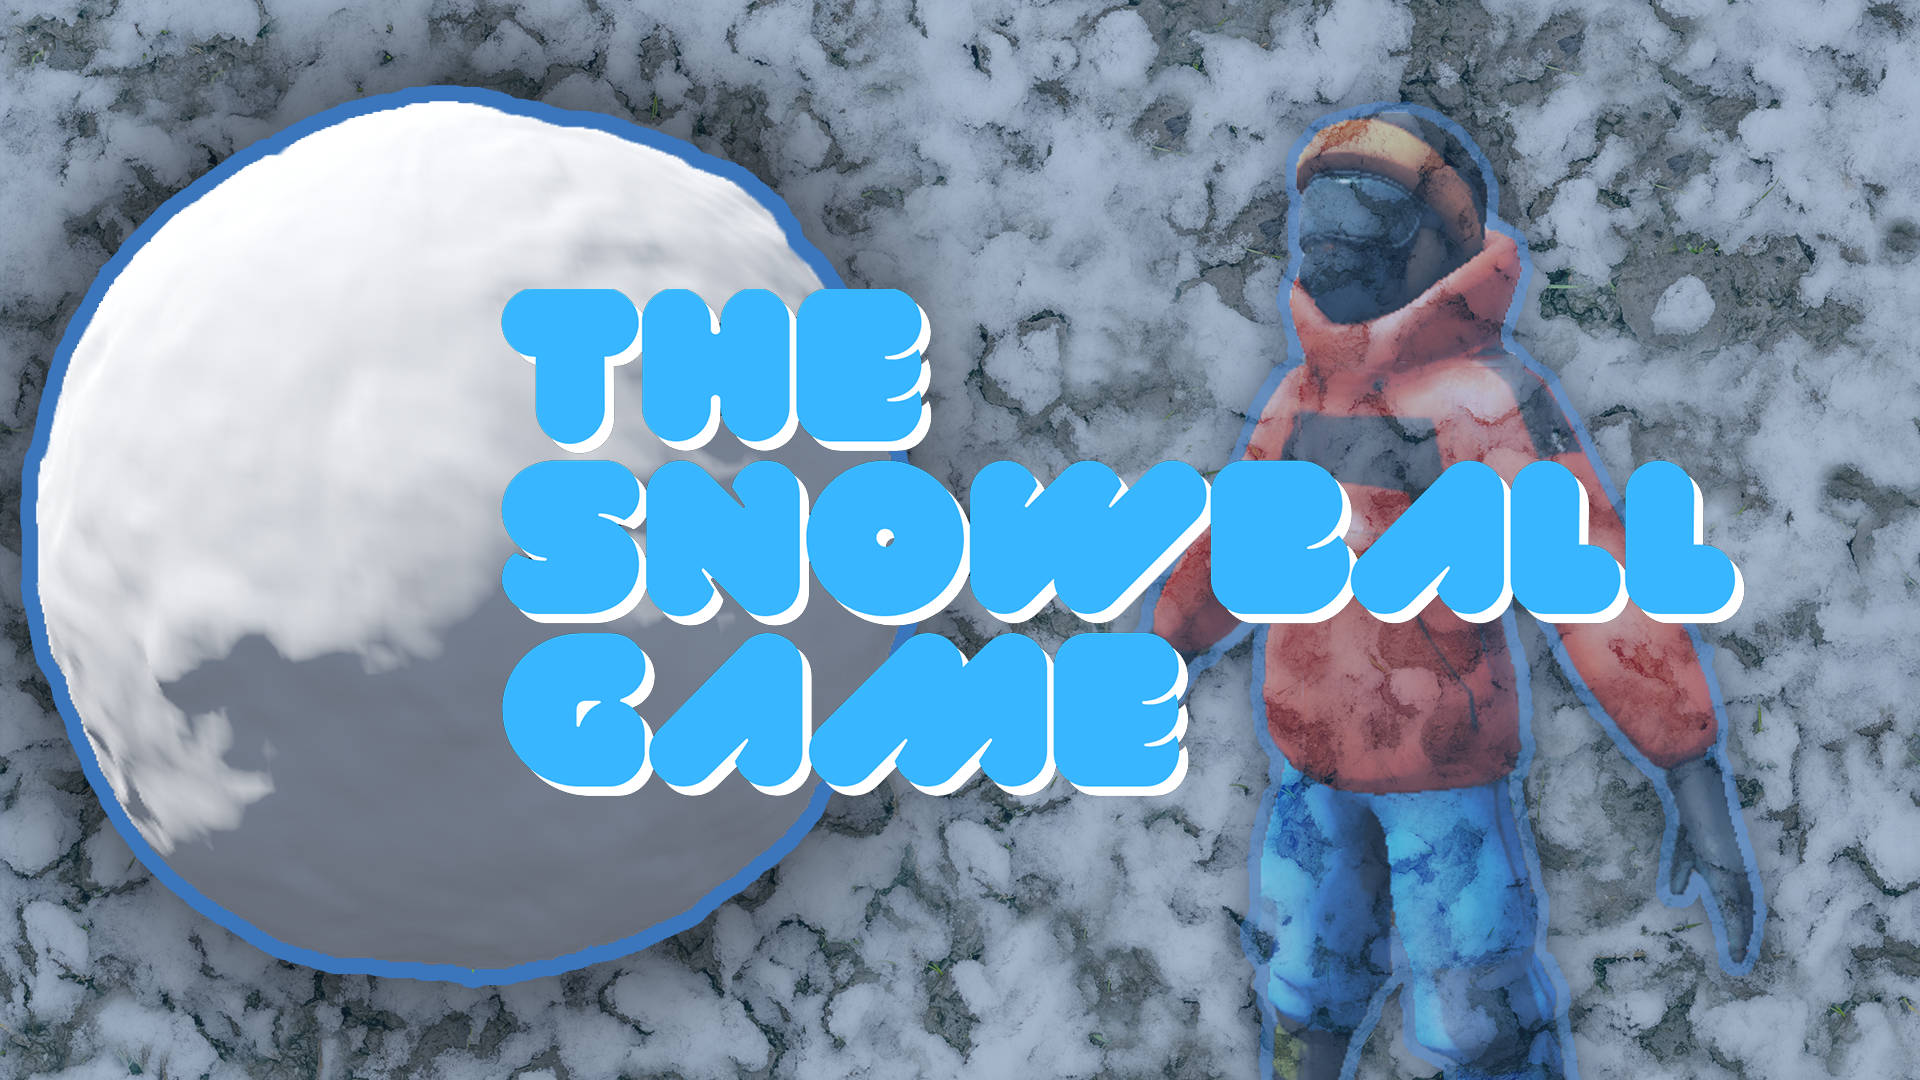 The Snowball Game